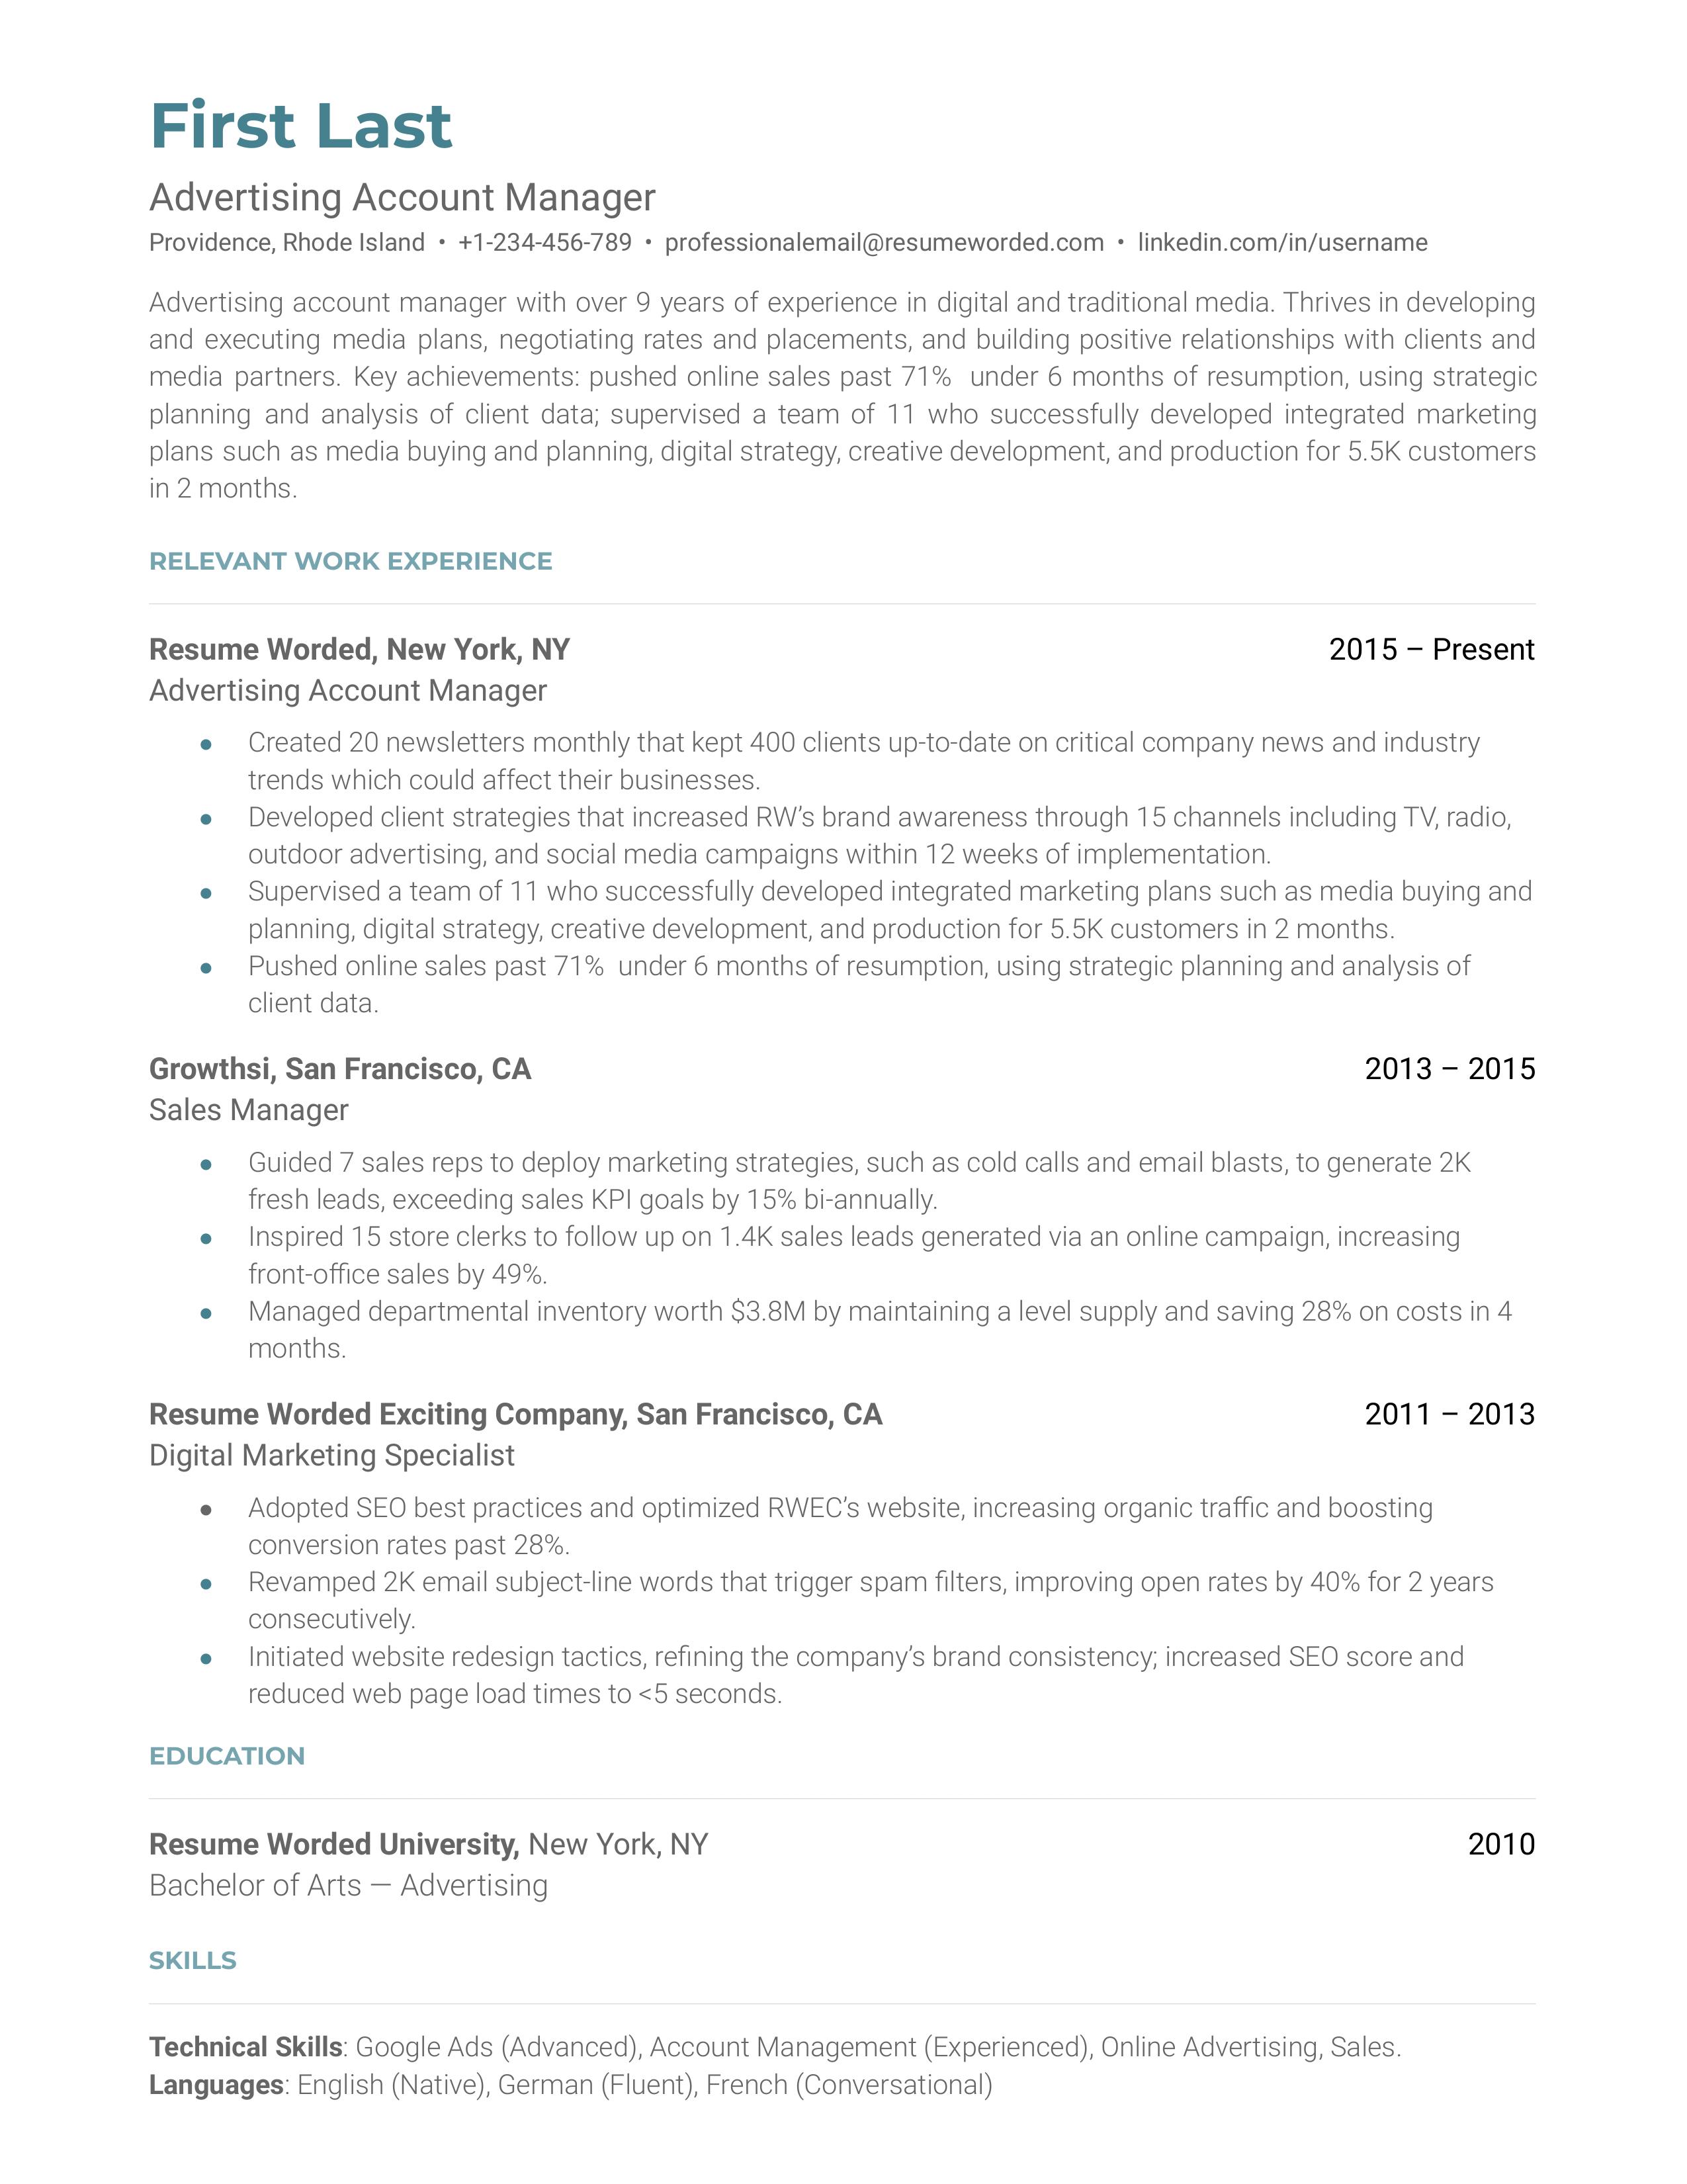 Advertising account manager resume sample that highlights the applicant's experience and skill set.